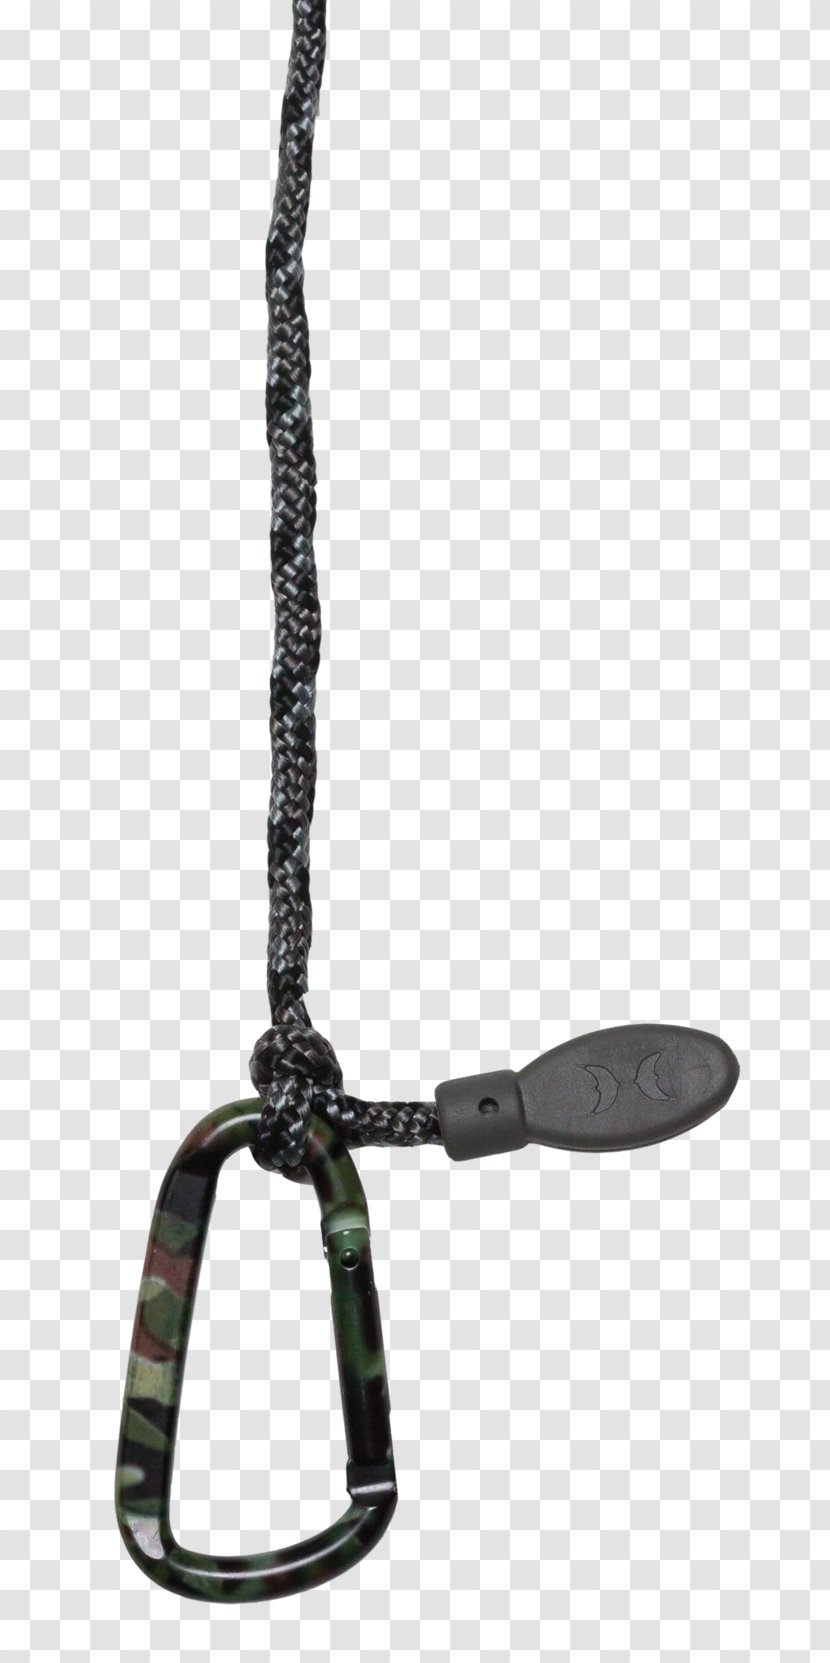 Leash - Climbing Rope Transparent PNG